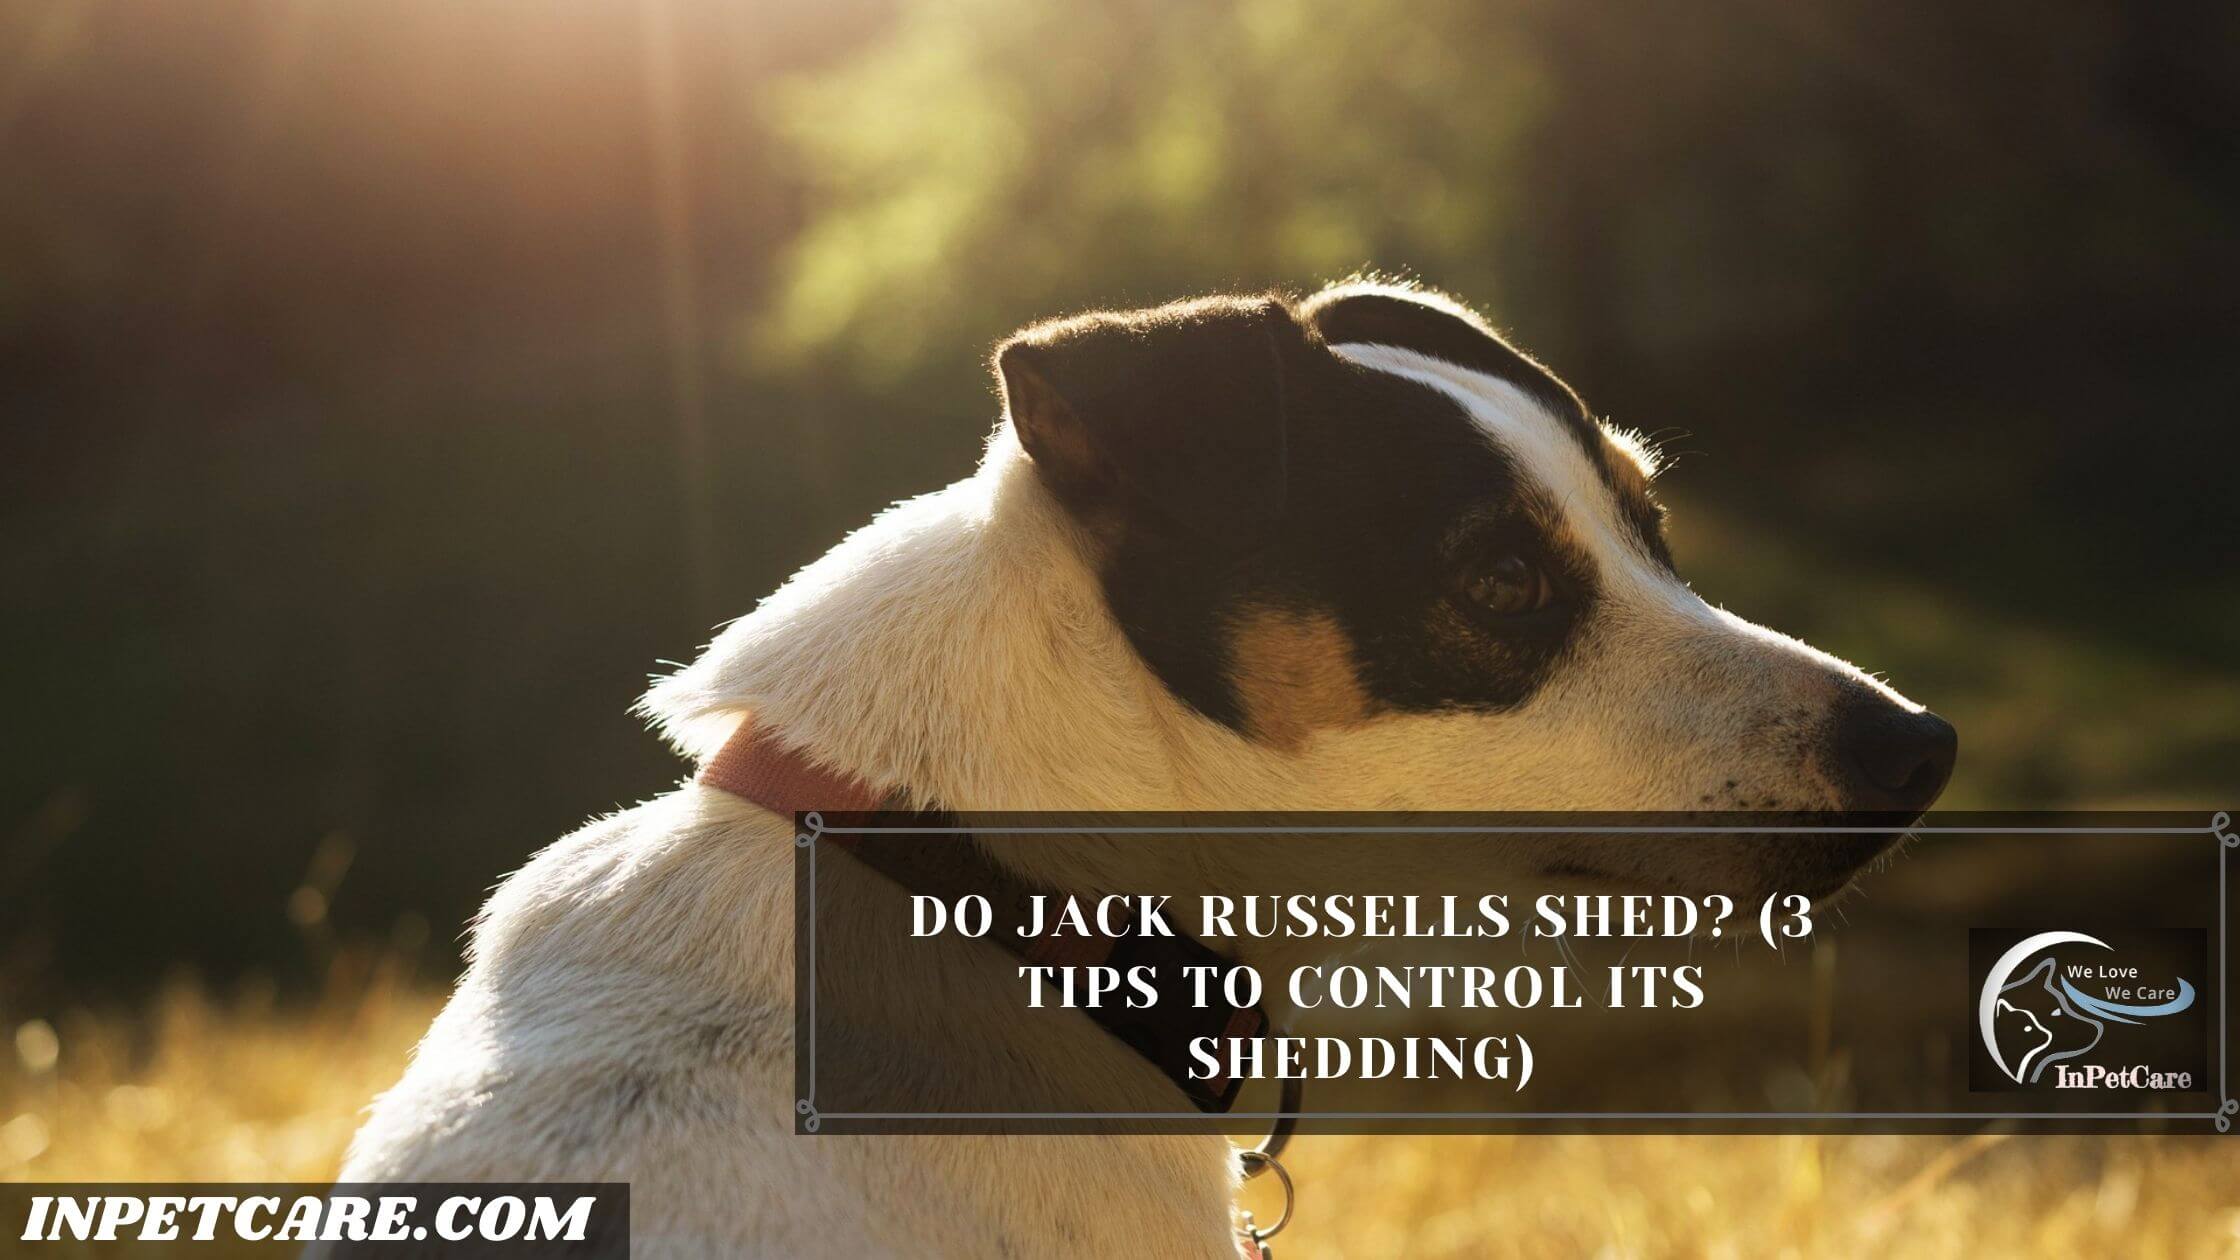 Do Jack Russells Shed? (3 Tips To Control Its Shedding)